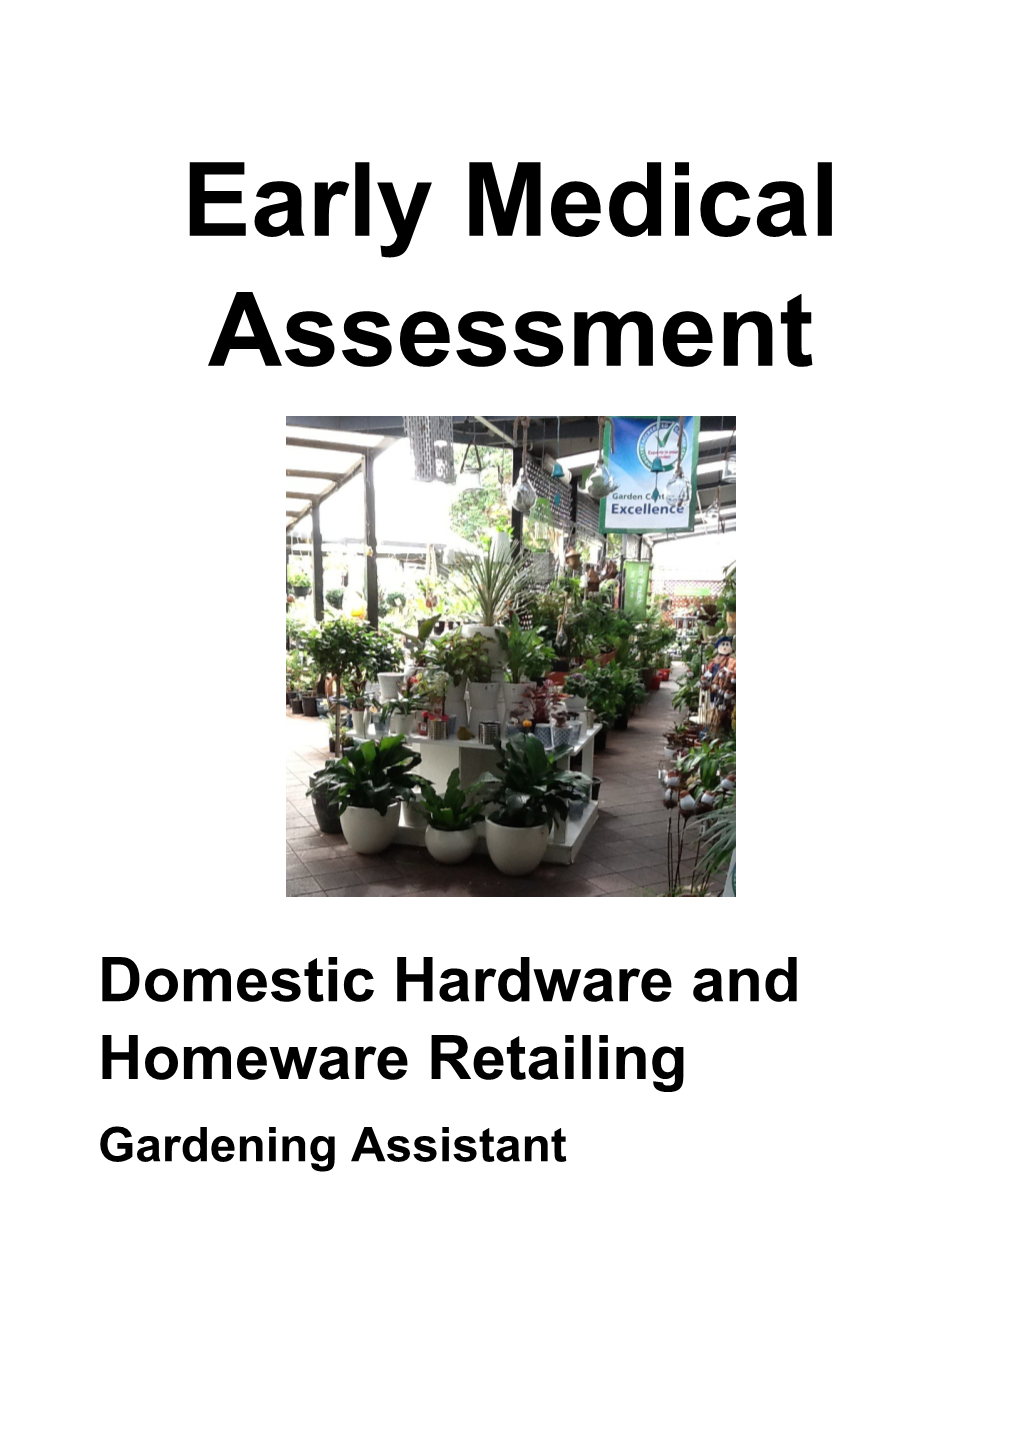 Domestic Hardware and Homeware Retailing - Gardening Assistant 2